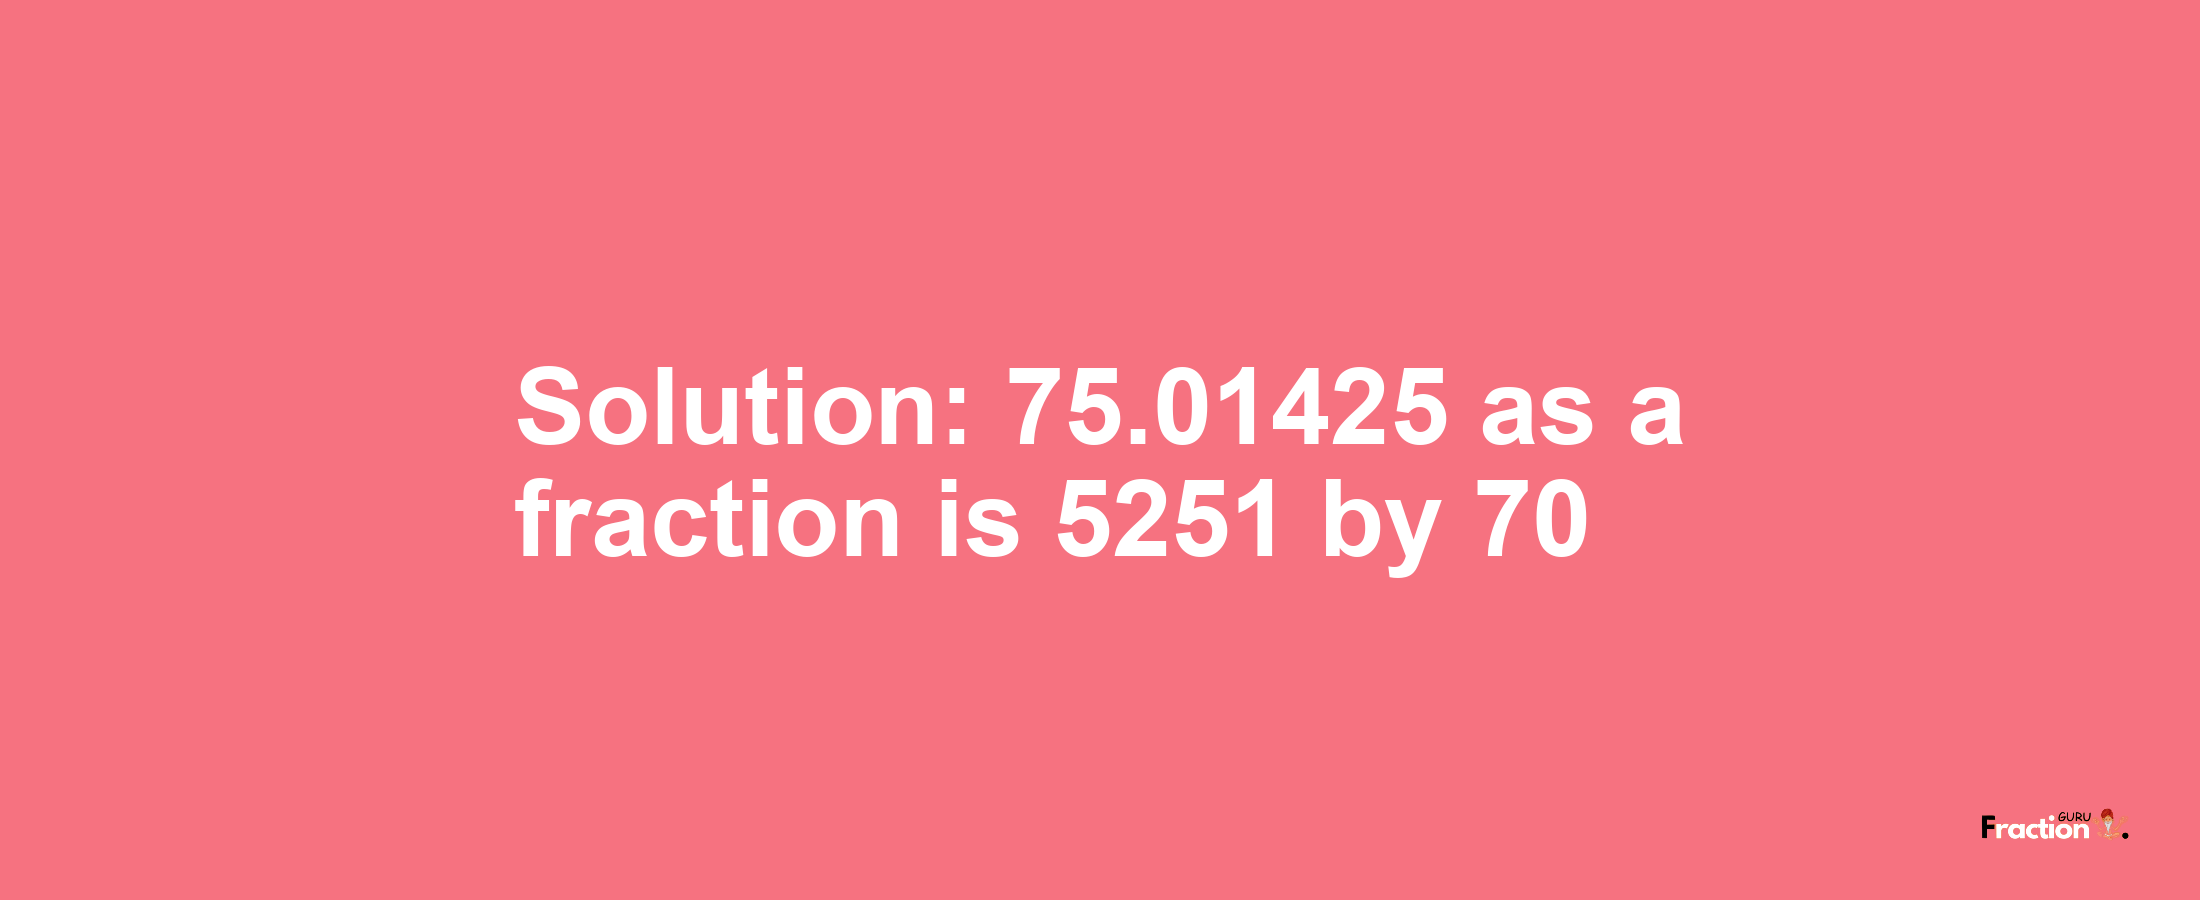 Solution:75.01425 as a fraction is 5251/70